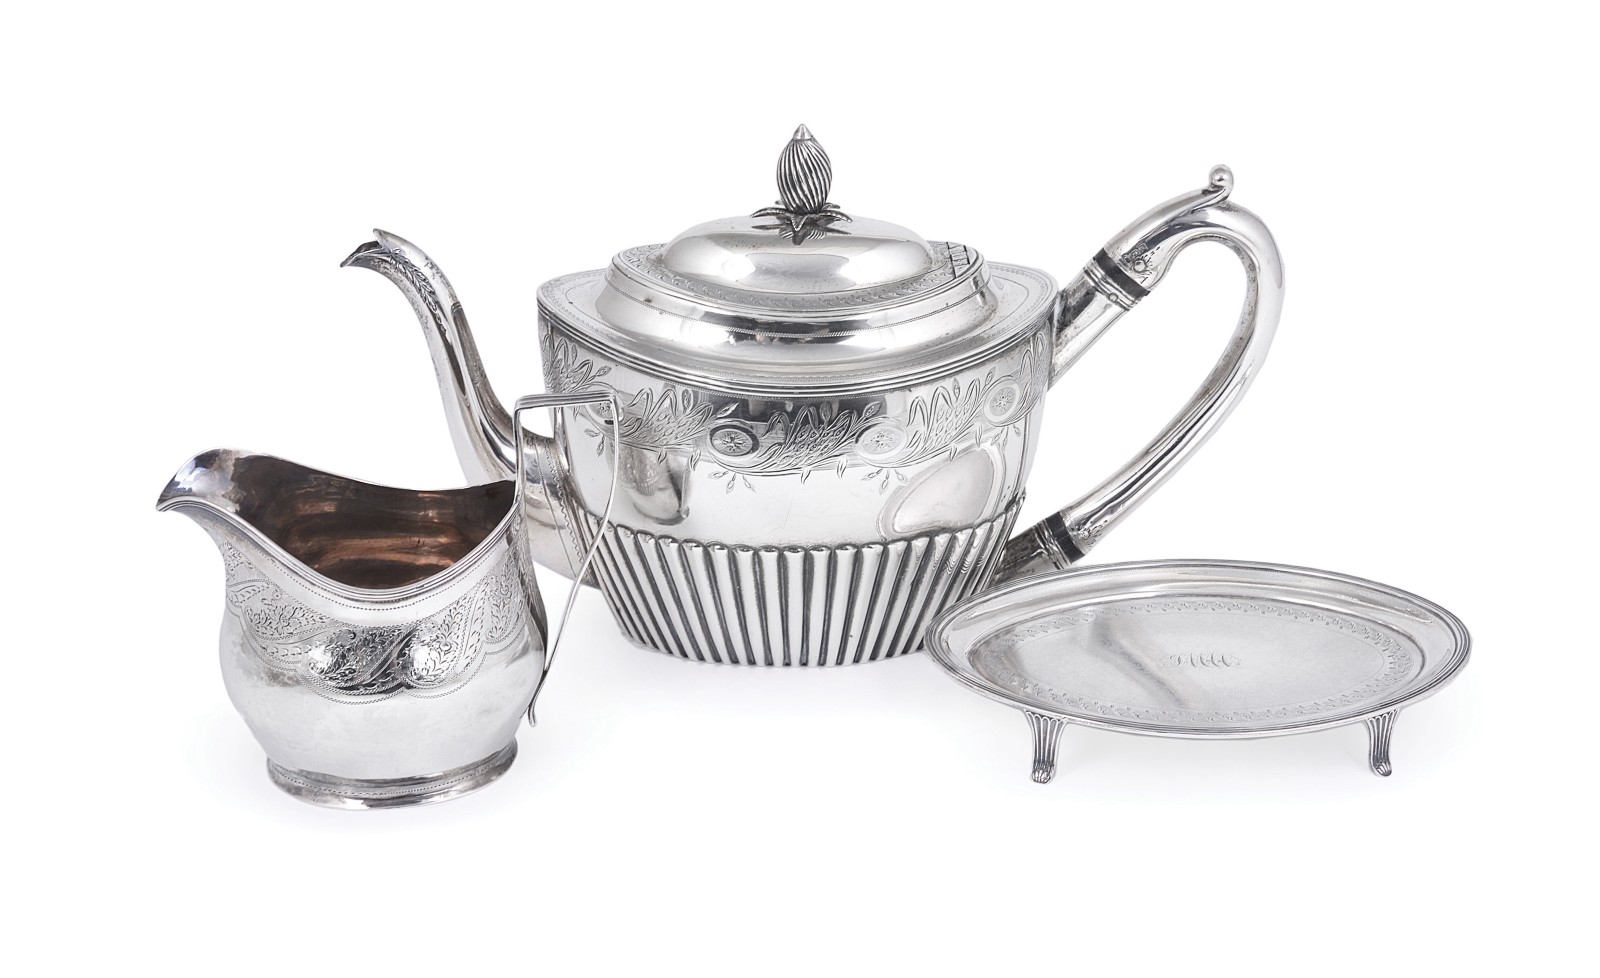 A GEORGE III SILVER TEAPOT ON STAND, PETER, ANN & WILLIAM BATEMAN, LONDON, 1800 the part lobed